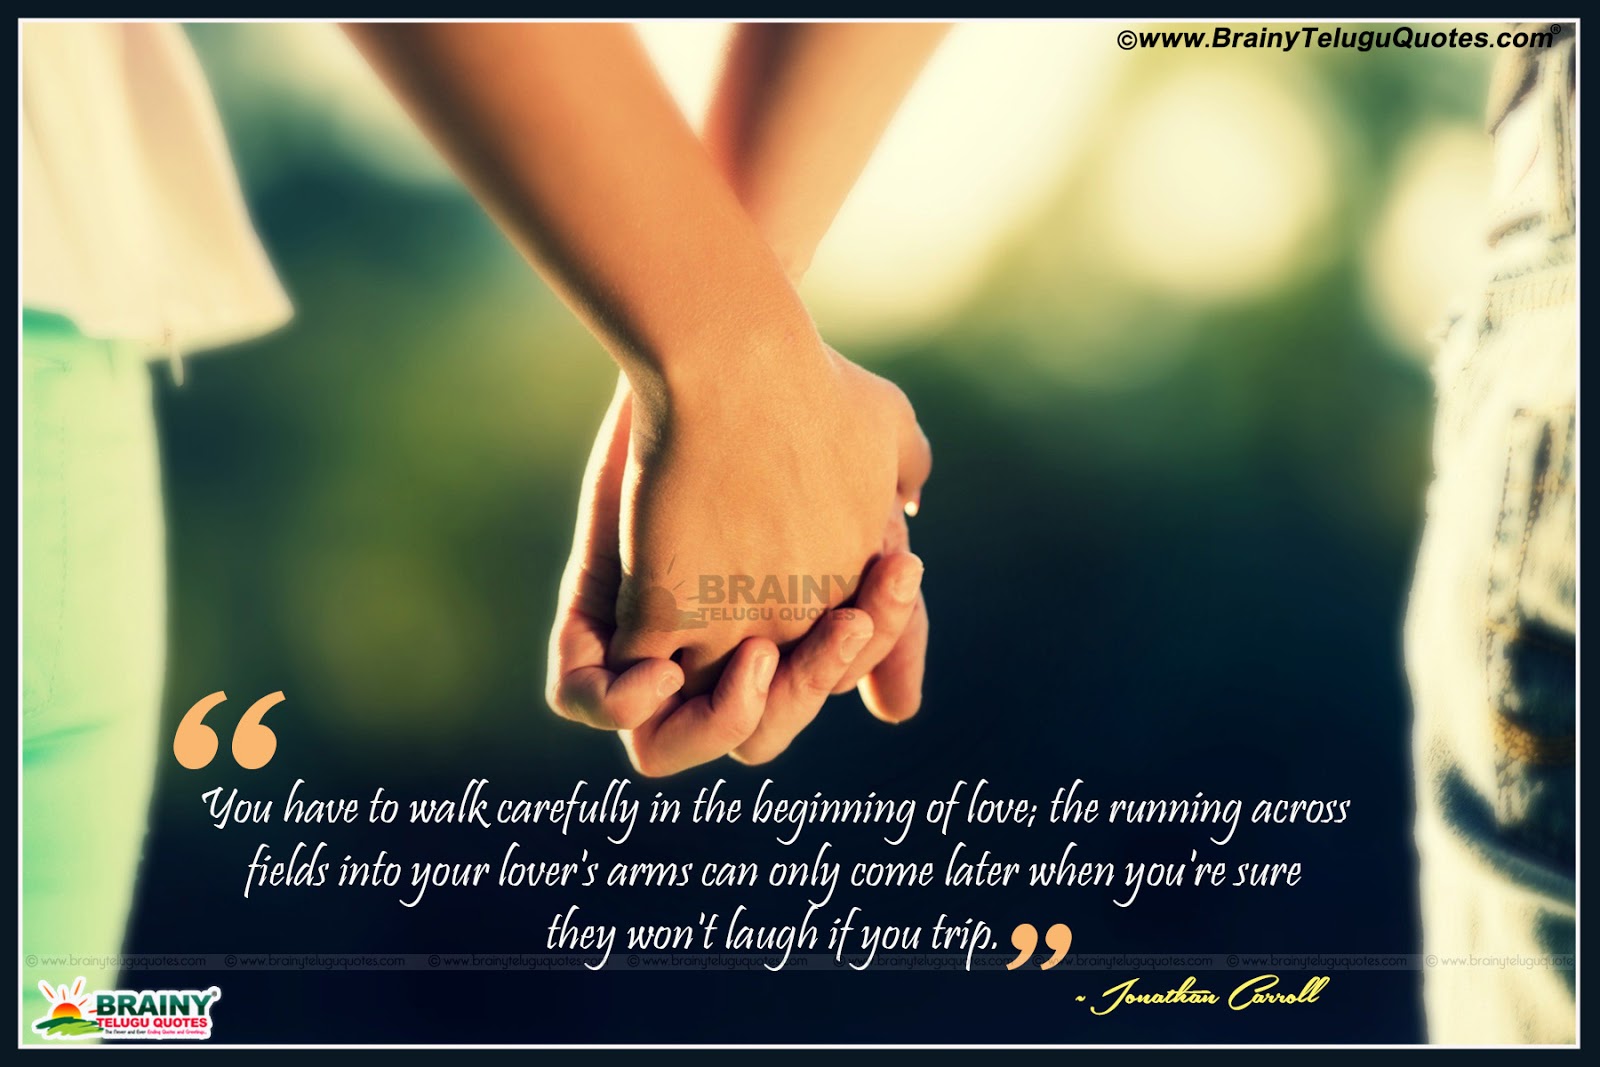 Holding on love hands quotes 36 Romantic